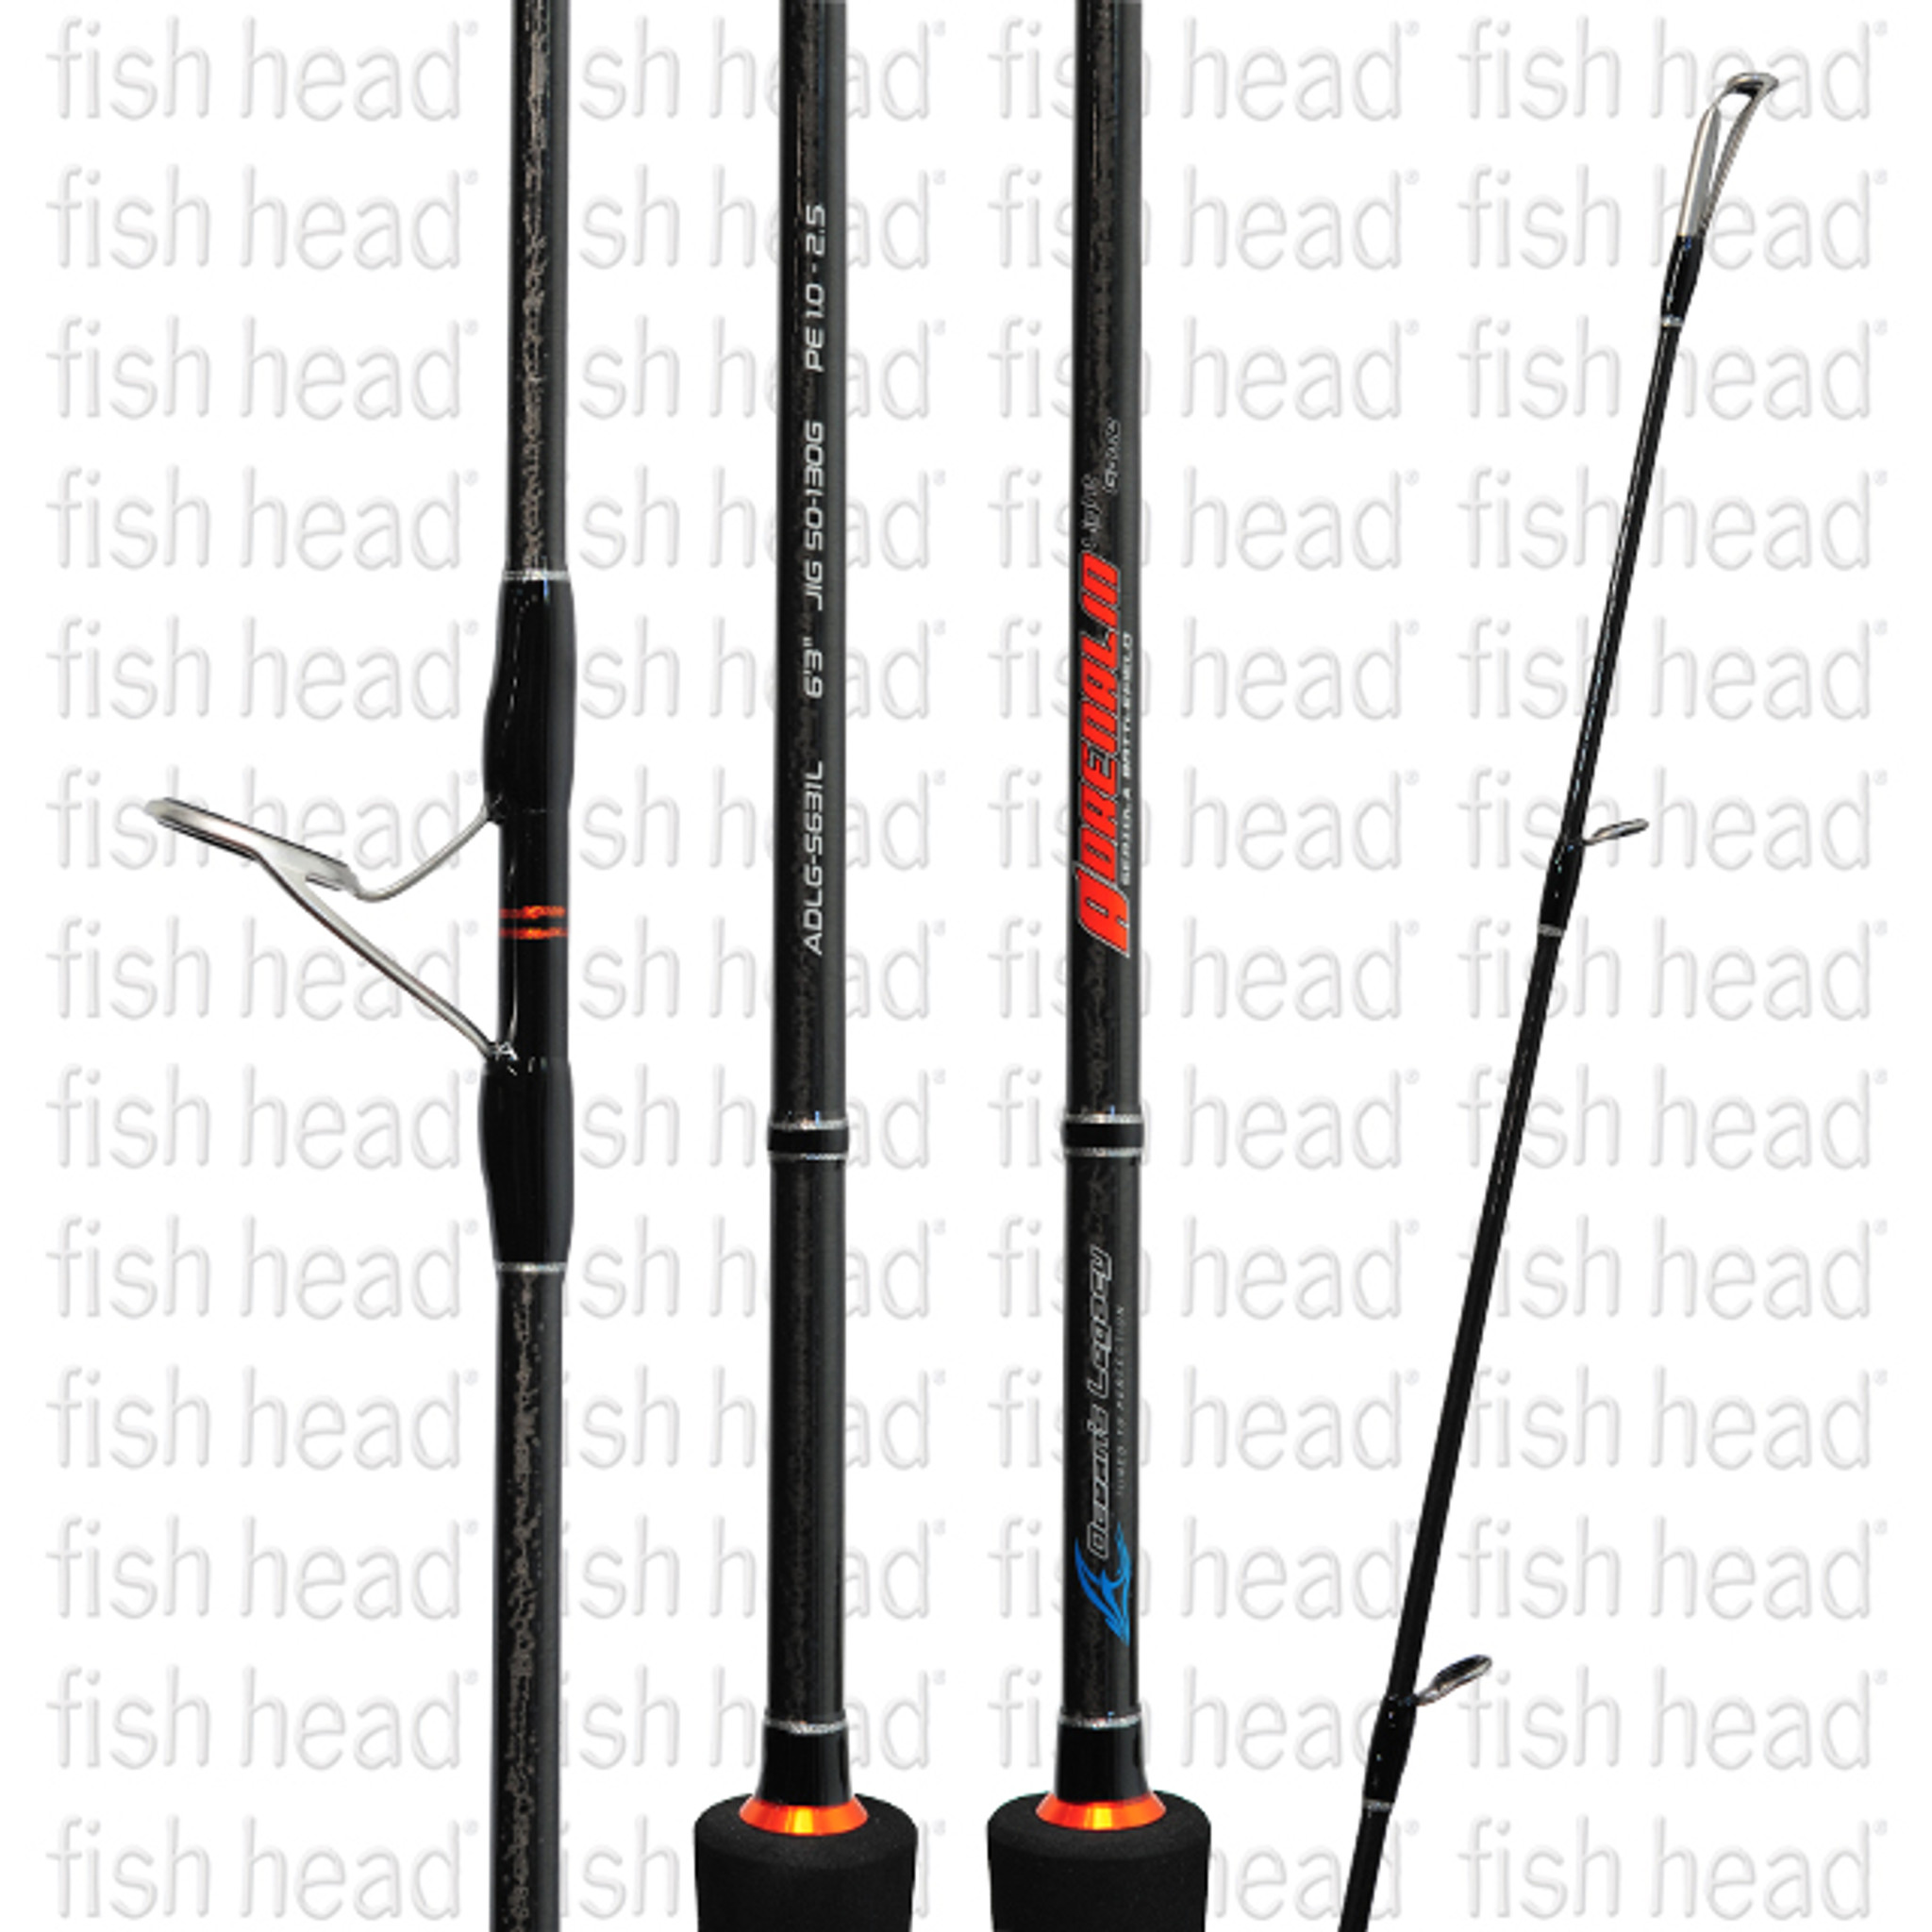 Oceans Legacy Adrenalin Light Game Spin Jigging Rods - Fish Head